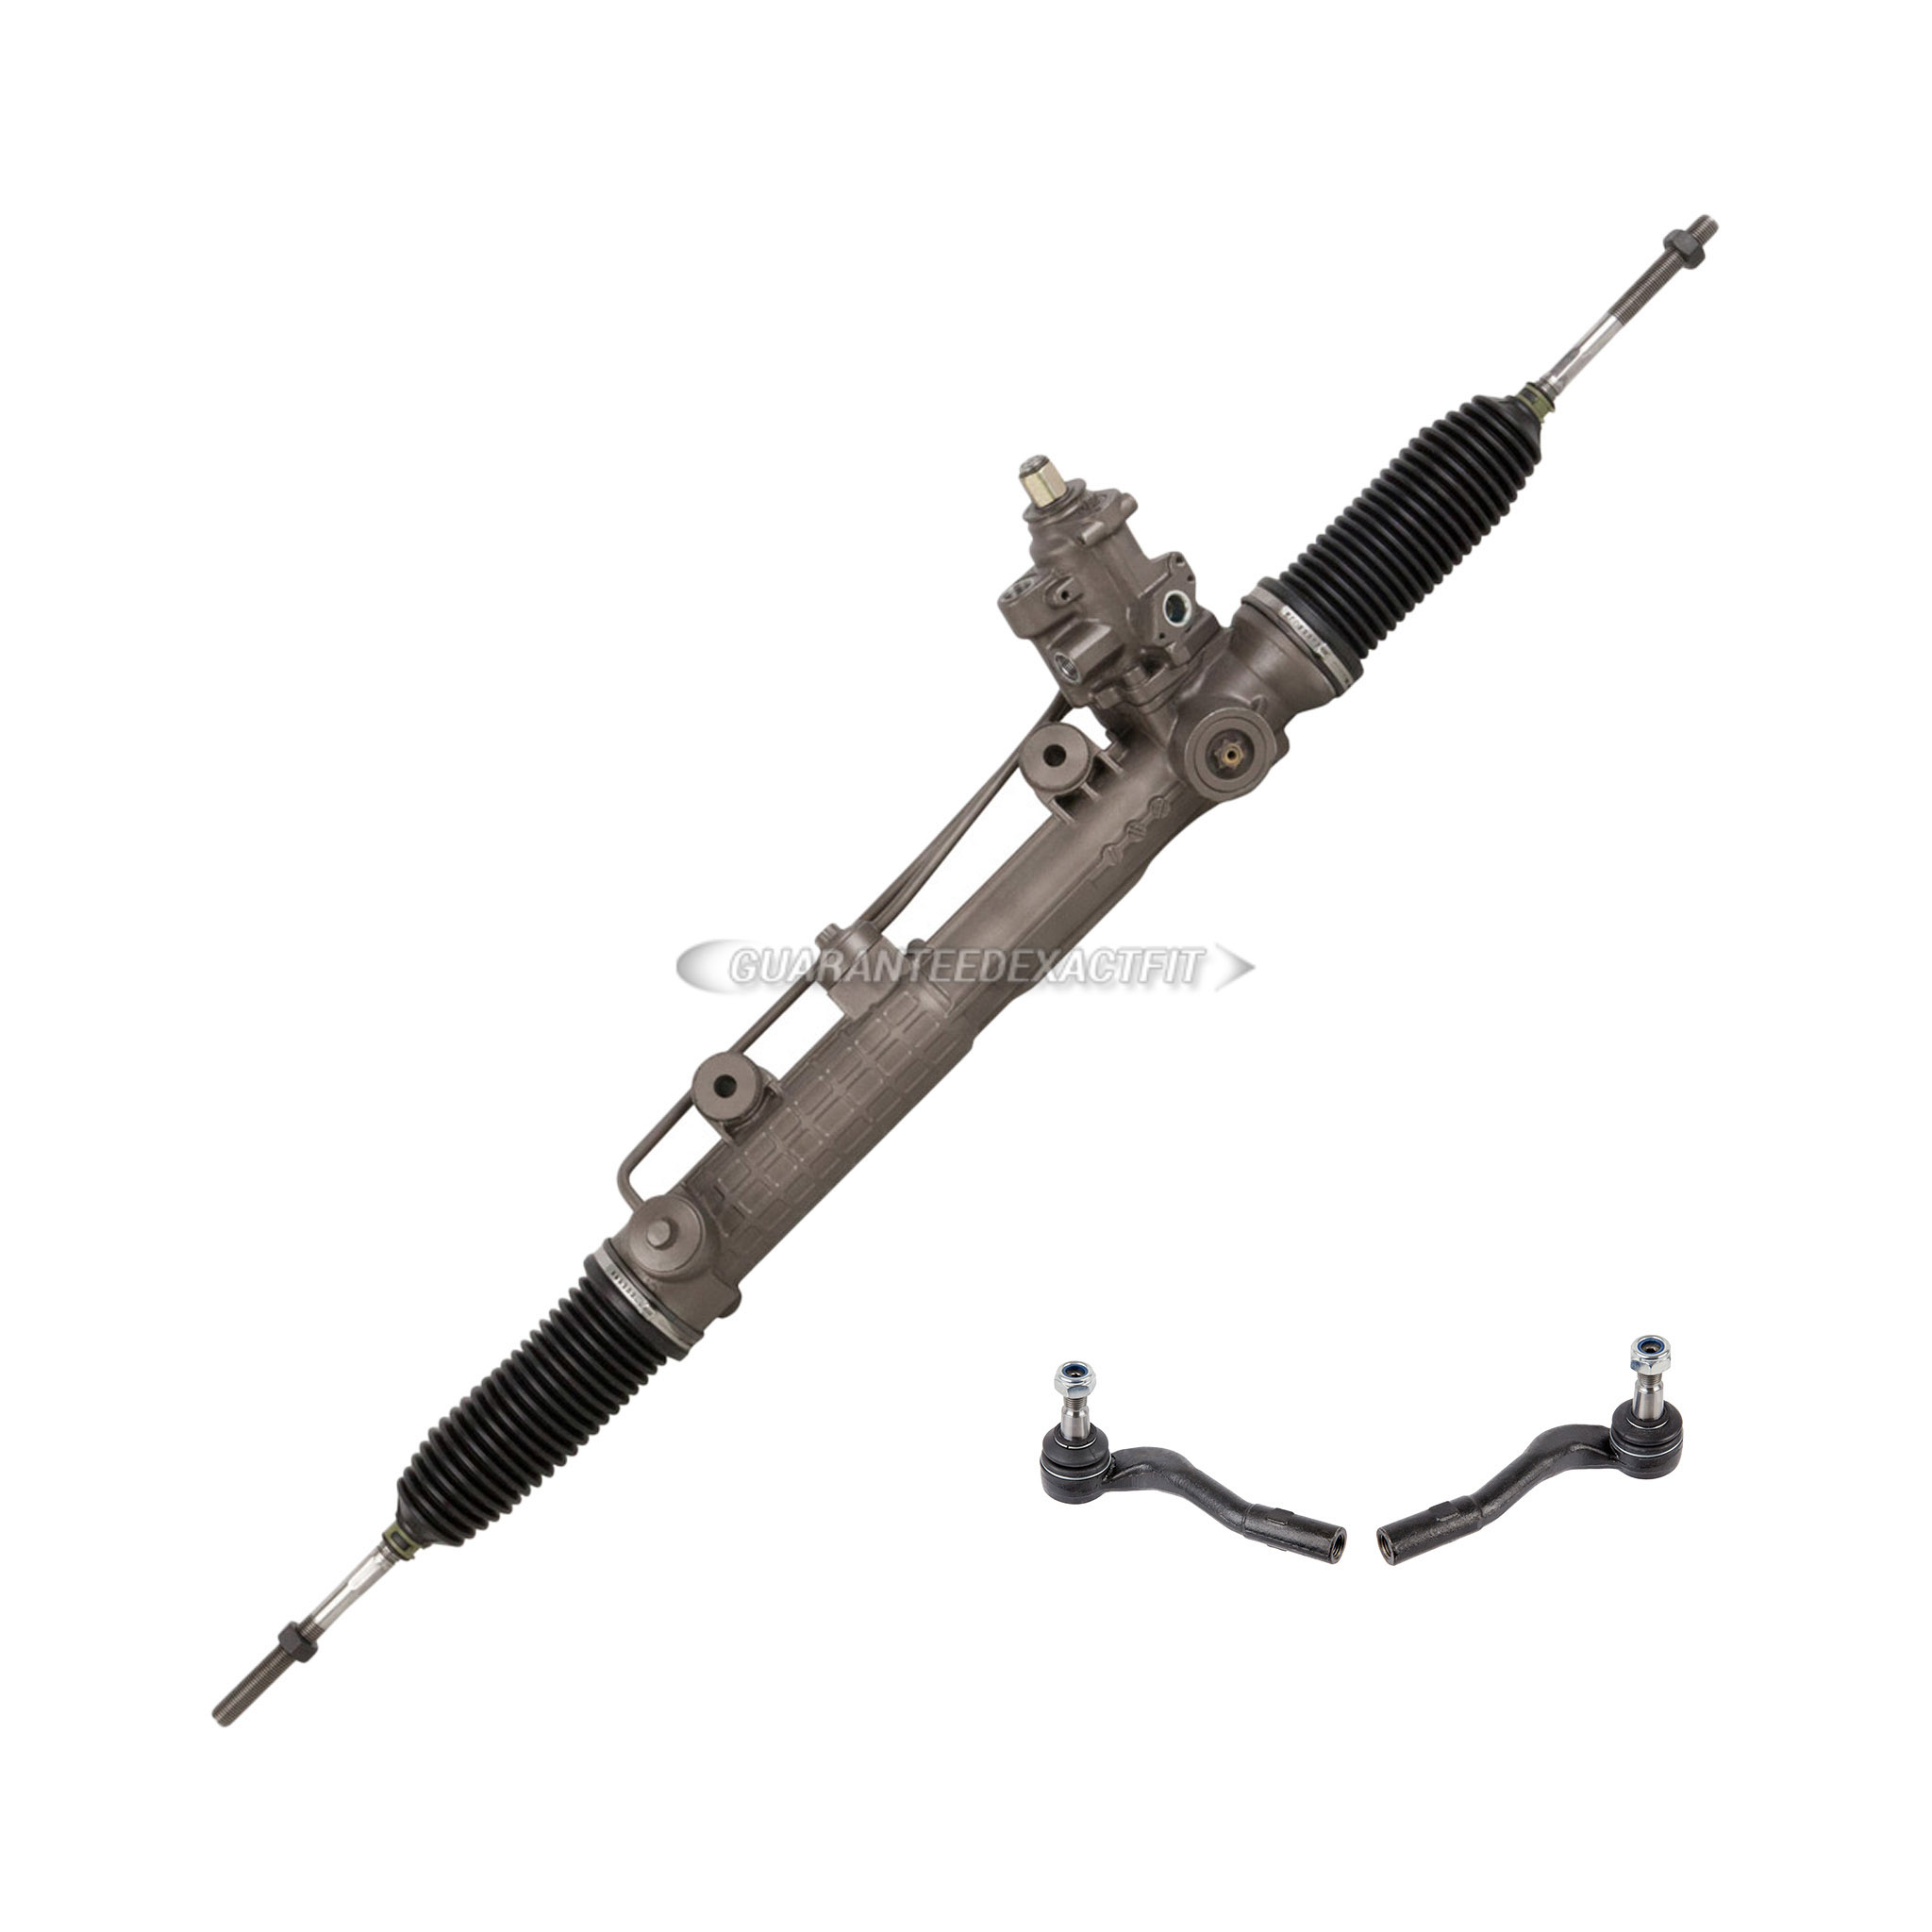  Mercedes Benz clk63 amg rack and pinion and outer tie rod kit 